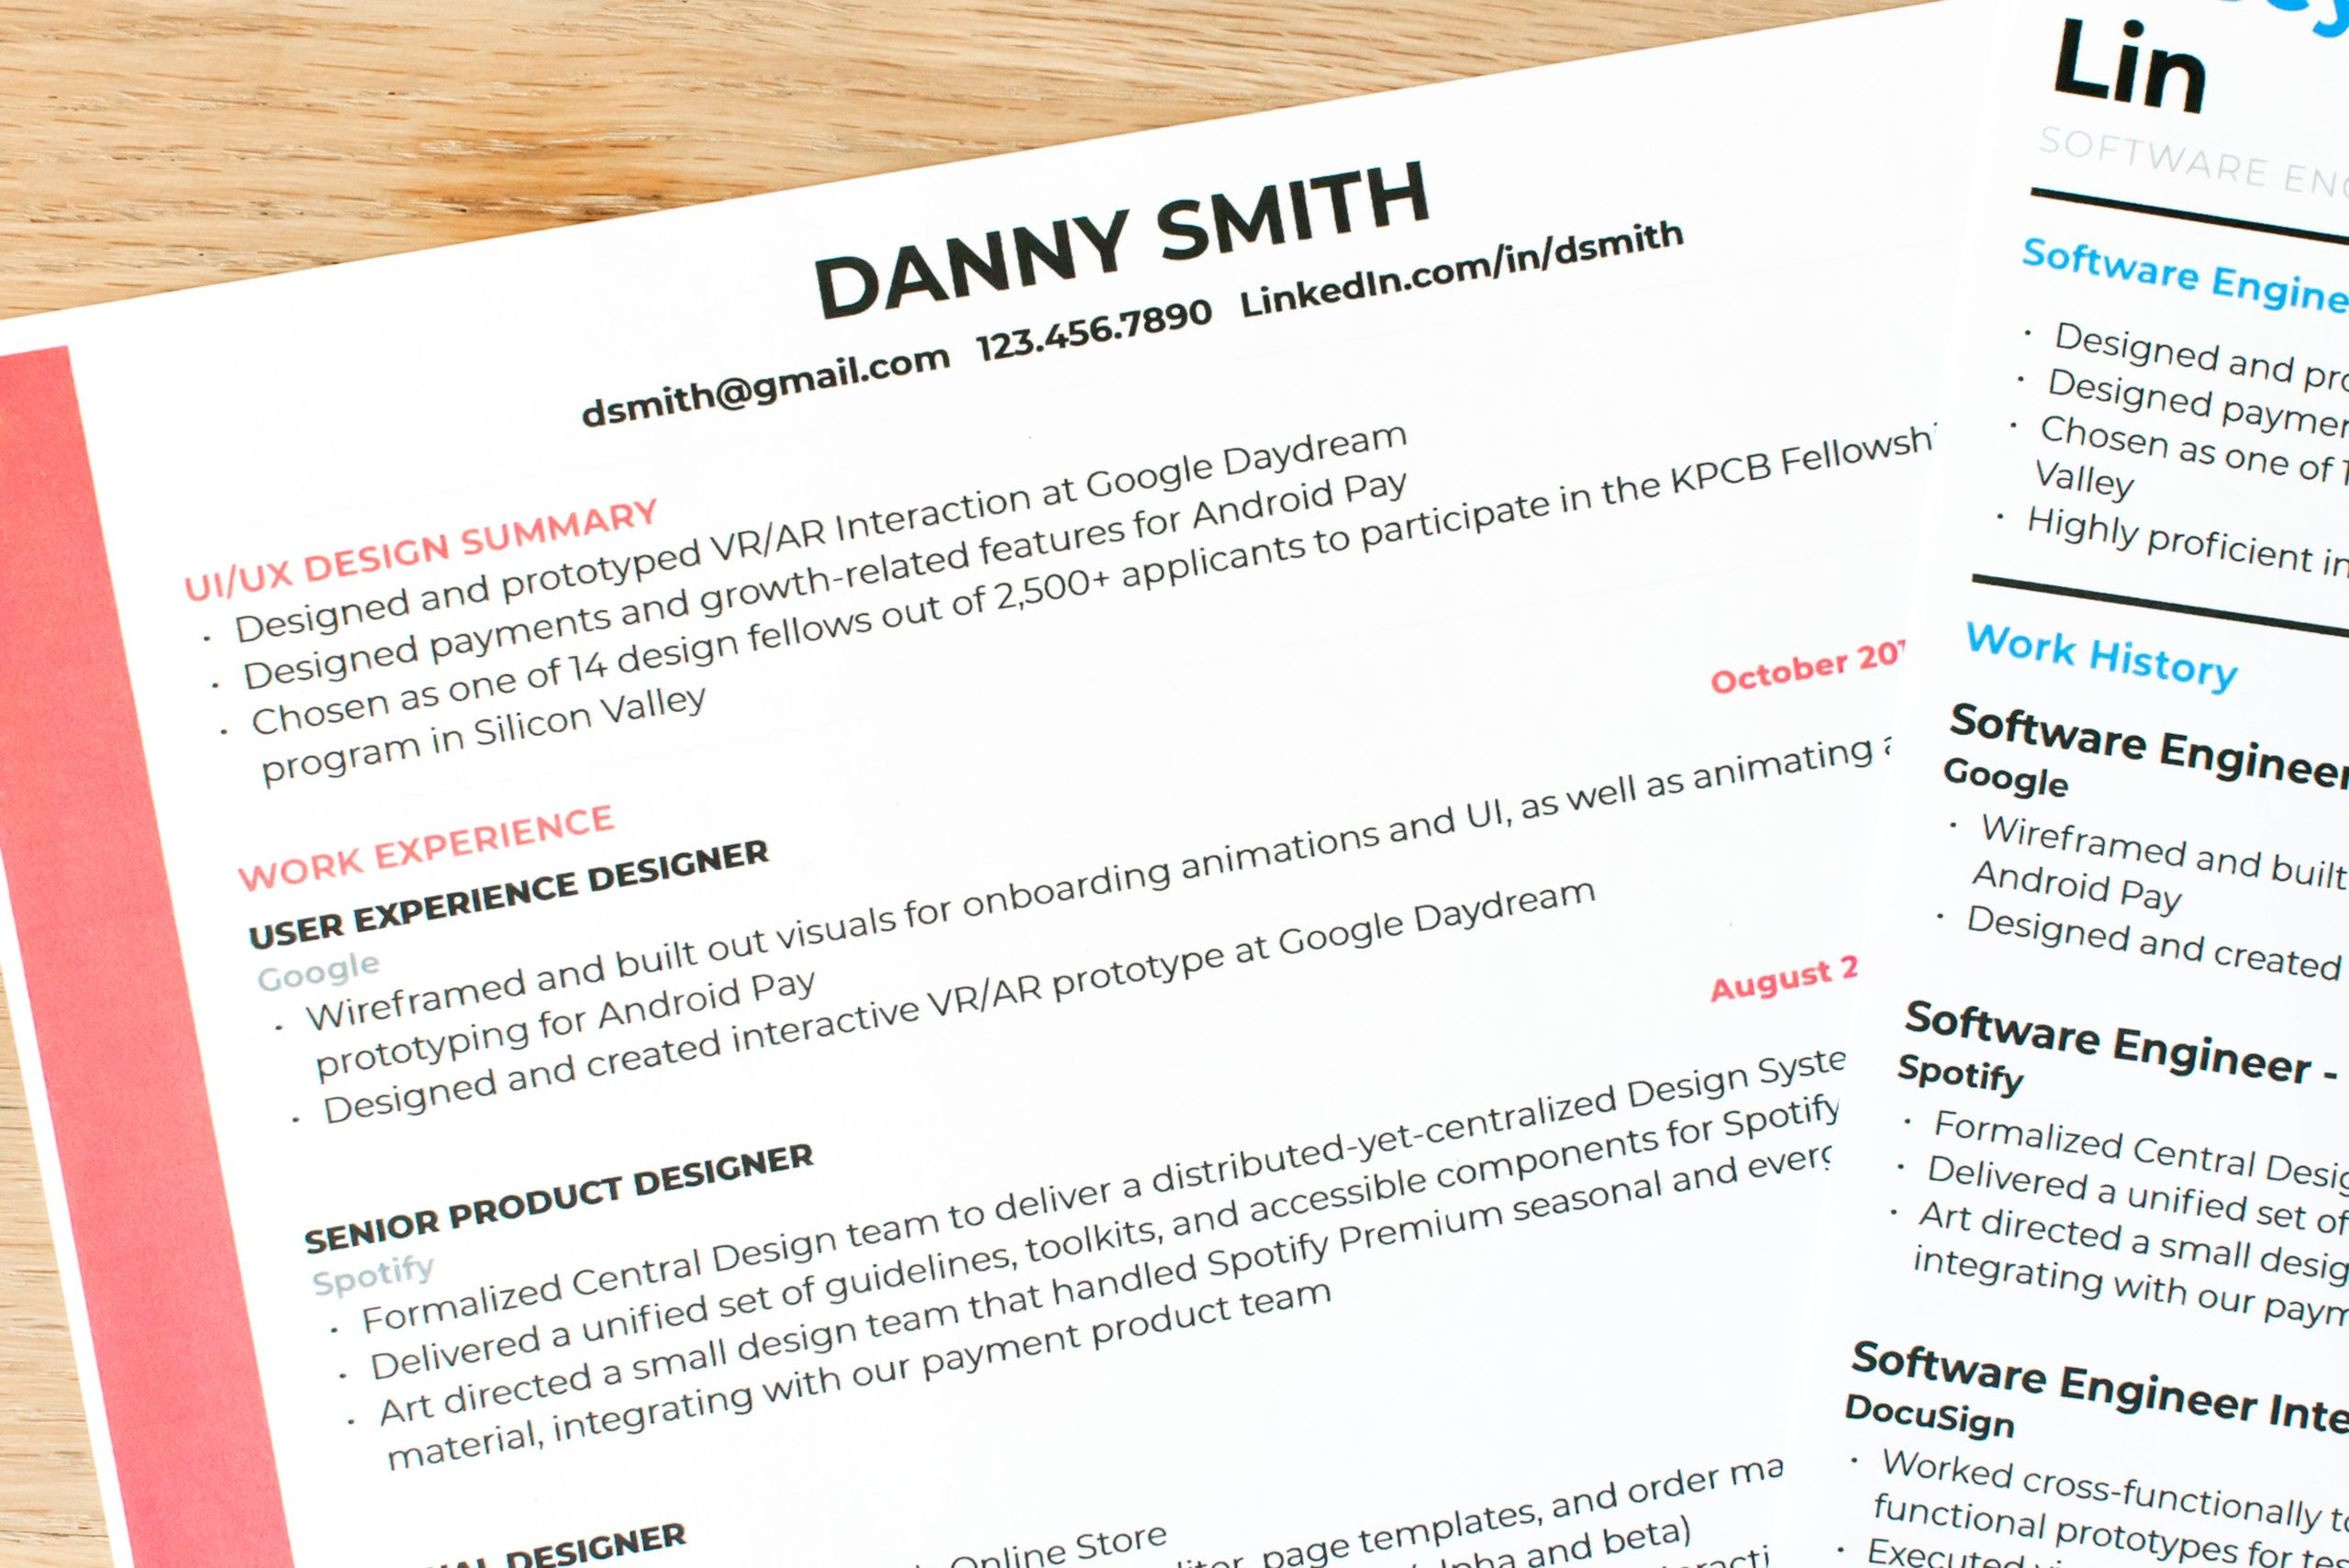 Good Sample Of Resume with Objectives How to Write A Resume Objective that Wins More Jobs [10lancarrezekiq Examples]